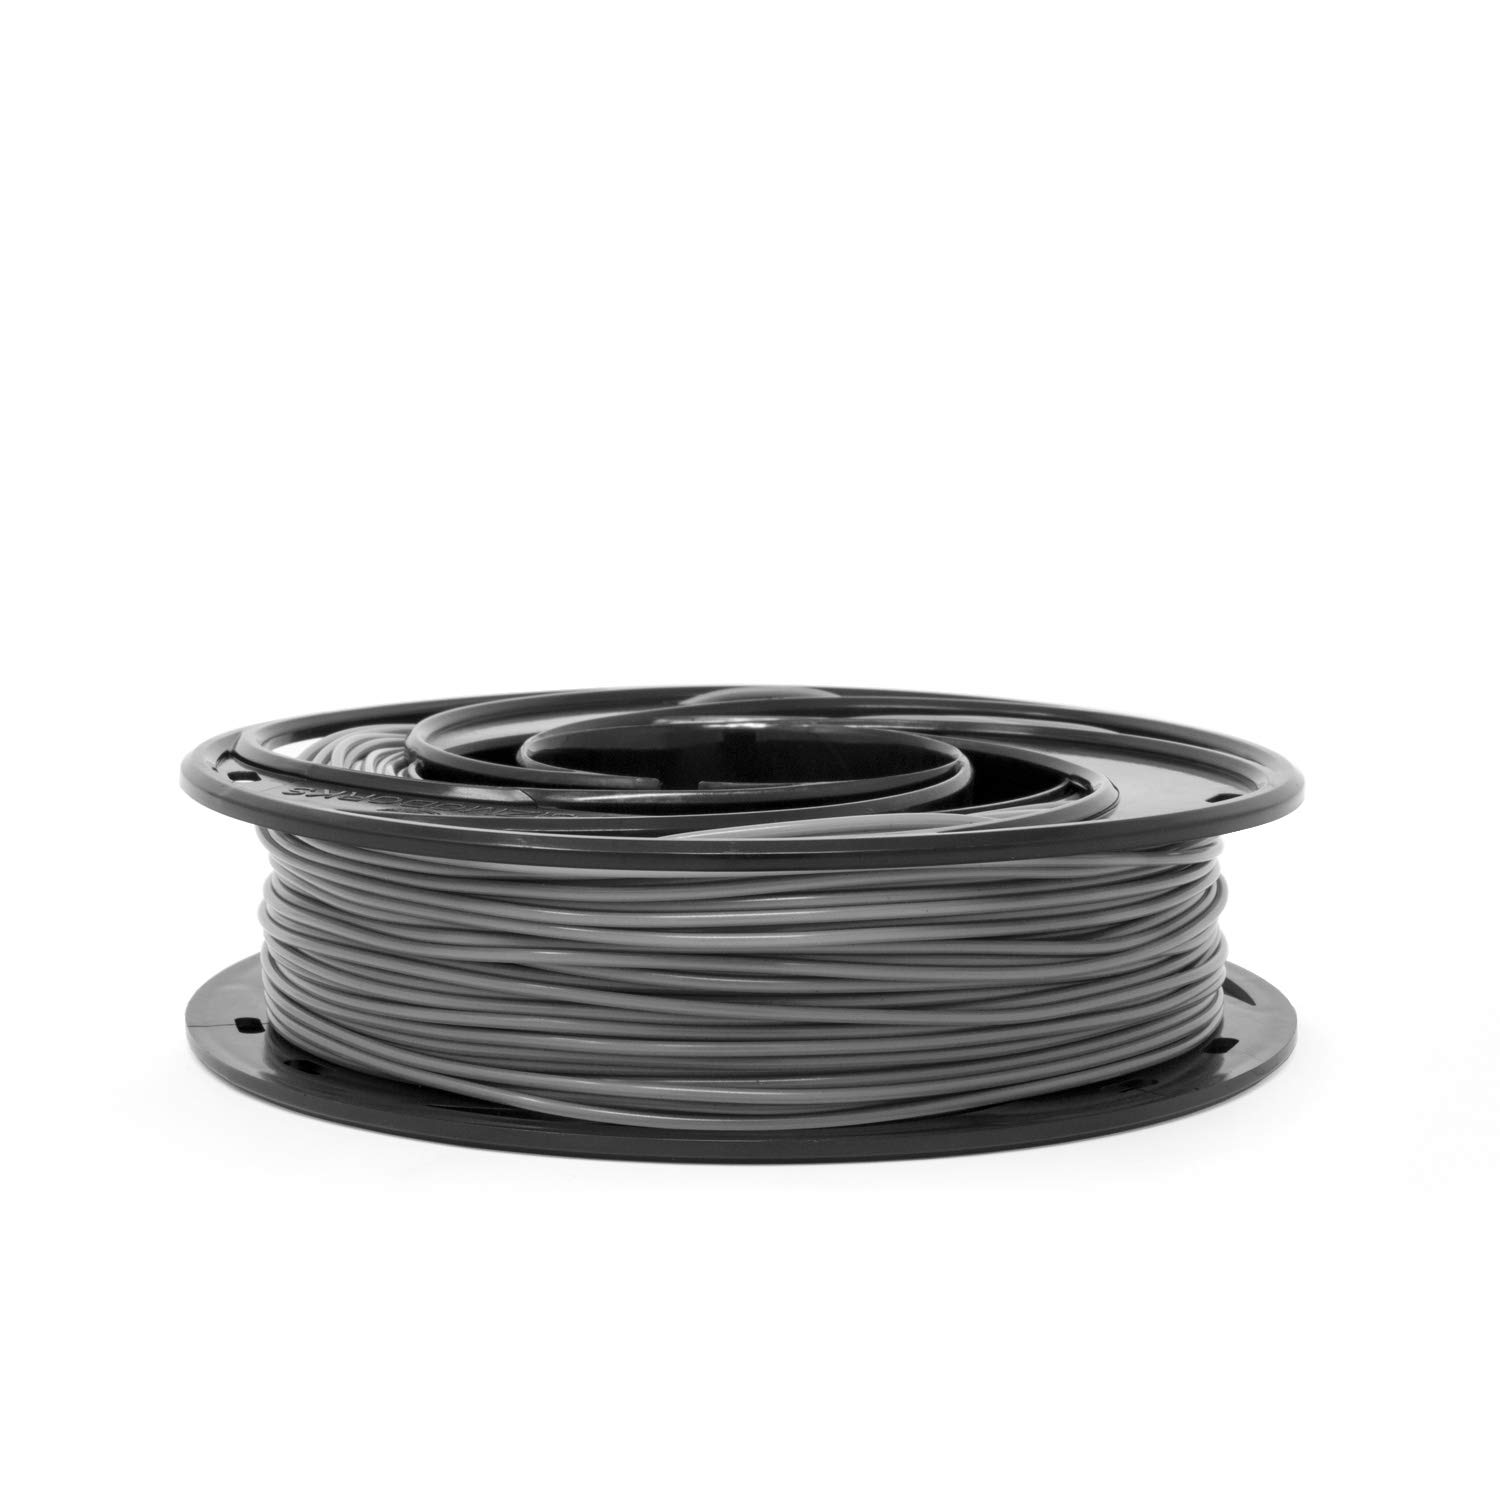 Gizmo Dorks PLA Filament 1.75mm 200g for 3D Printers, Heat Color Change Gray to White